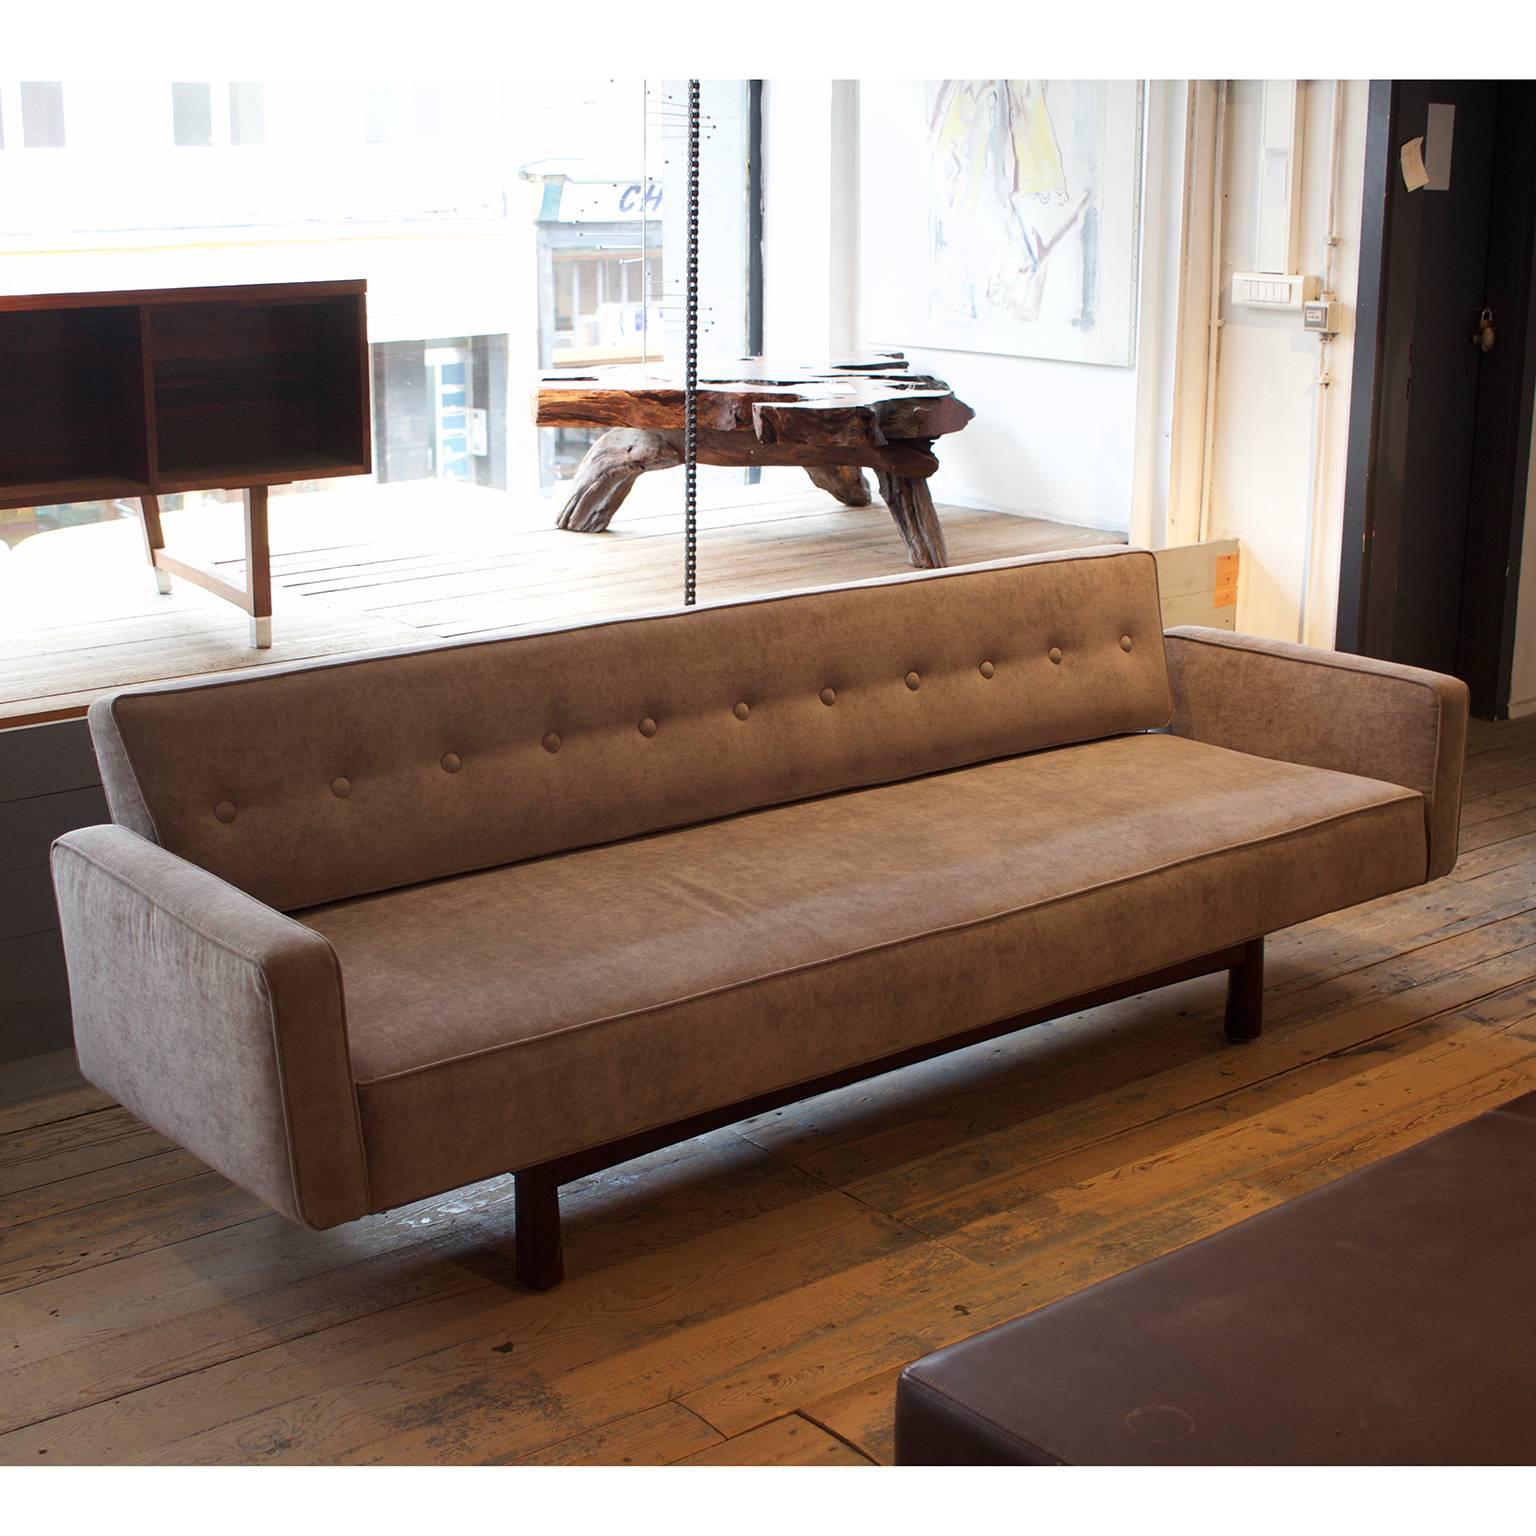 Elegant sofa designed by Edward Wormley for DUX /Llungs Industrier in the 1960s. 

New upholstered and covered with a high quality fabric in warmgrey. The wooden frame is still in a very good condition.